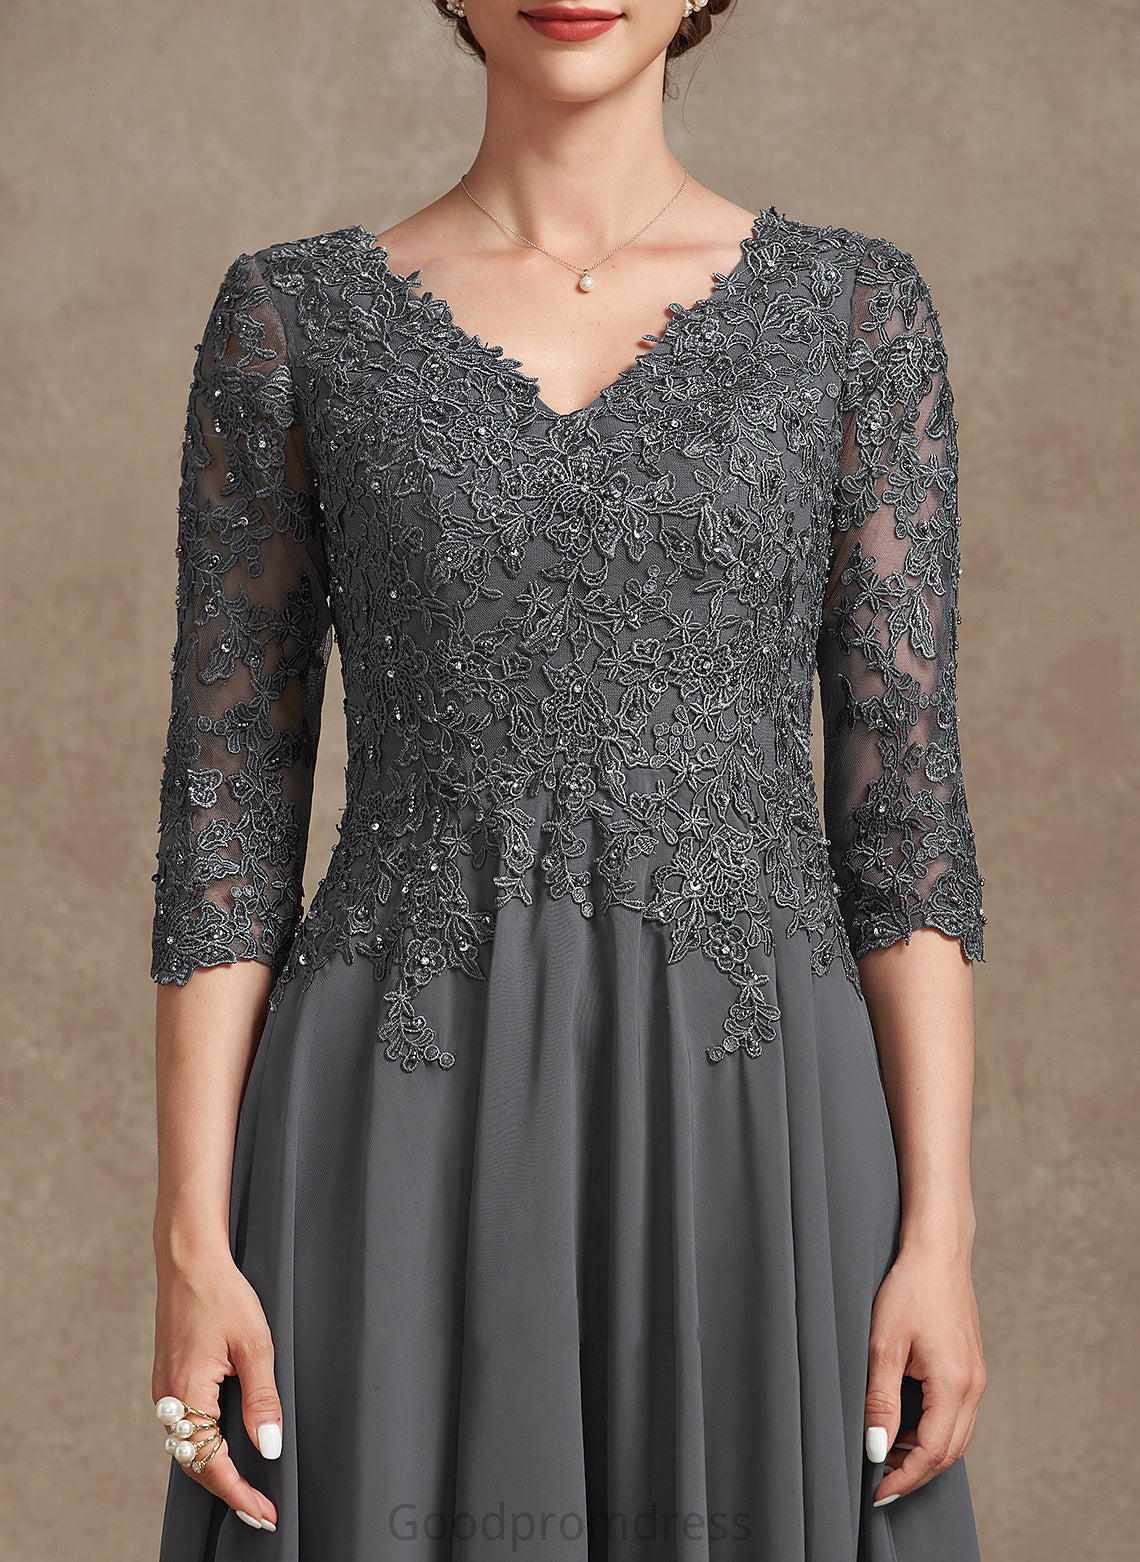 A-Line Tea-Length Lace Dress Chiffon V-neck Beading the Mother of the Bride Dresses of Sequins Bride Ellen Mother With